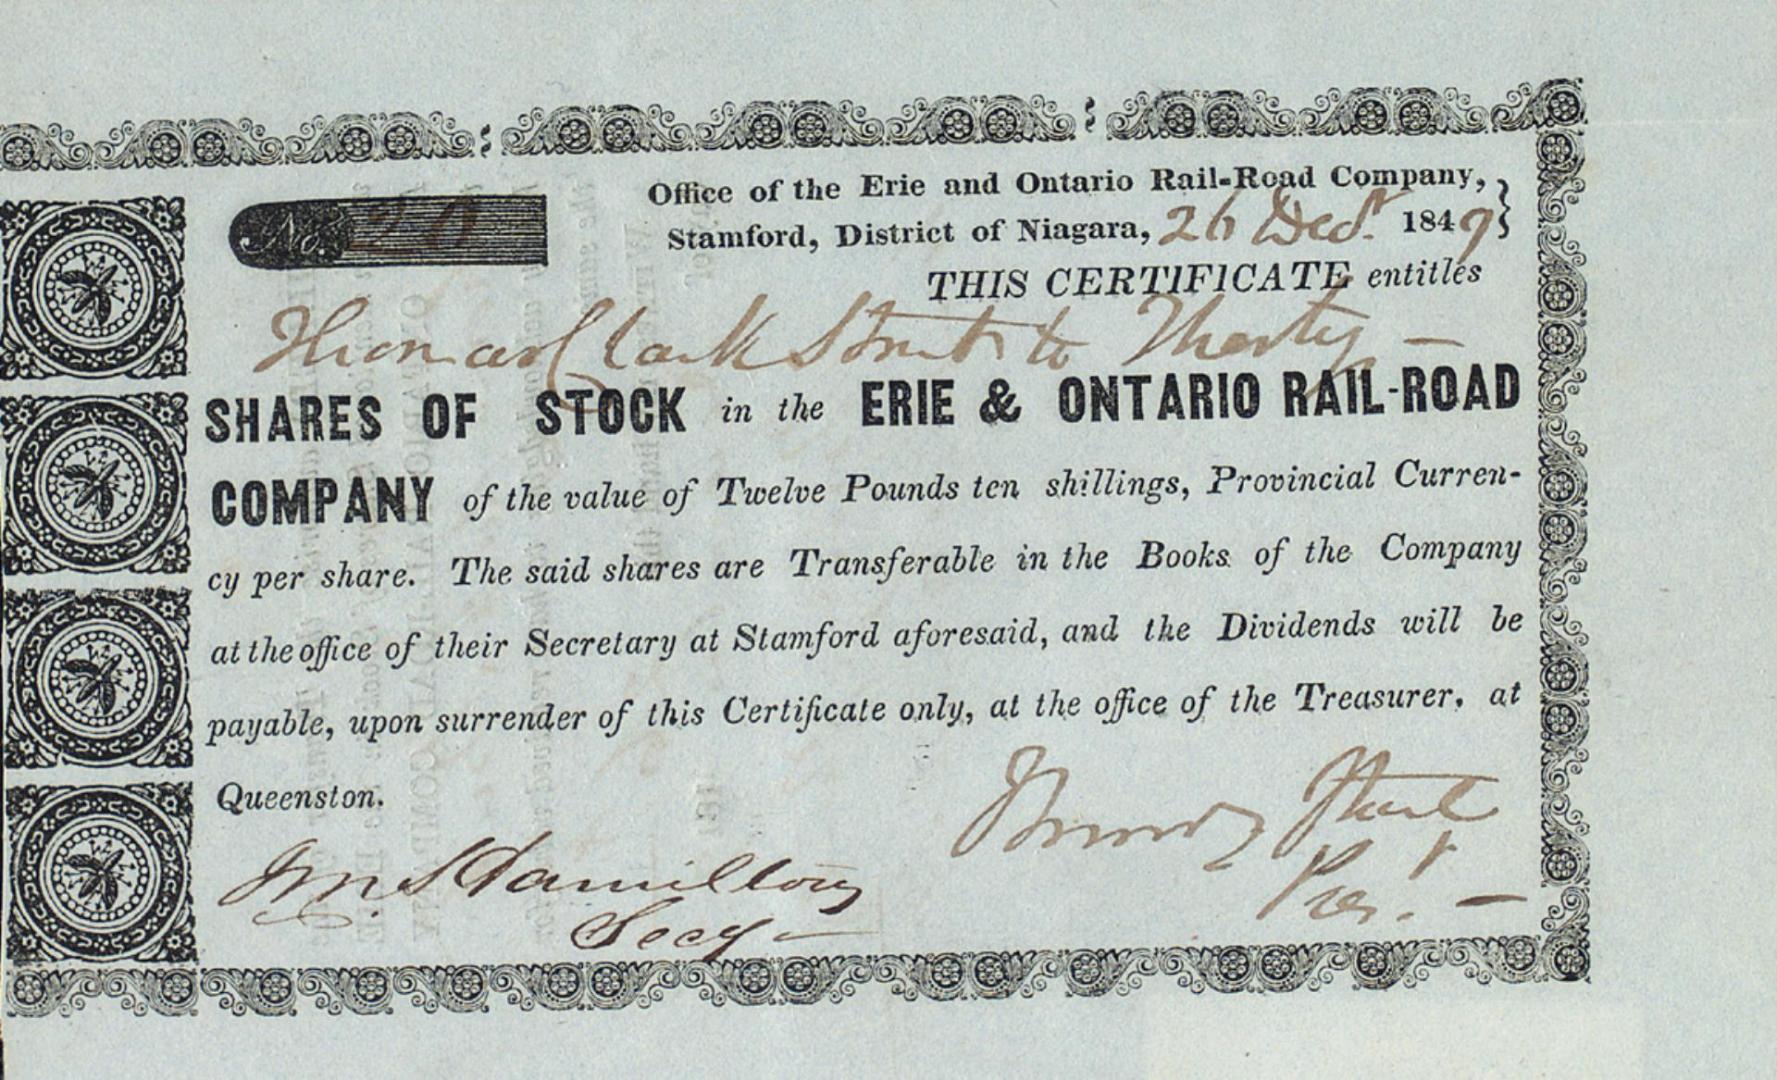 Shares of Stock in the Erie & Ontario Rail-Road Company